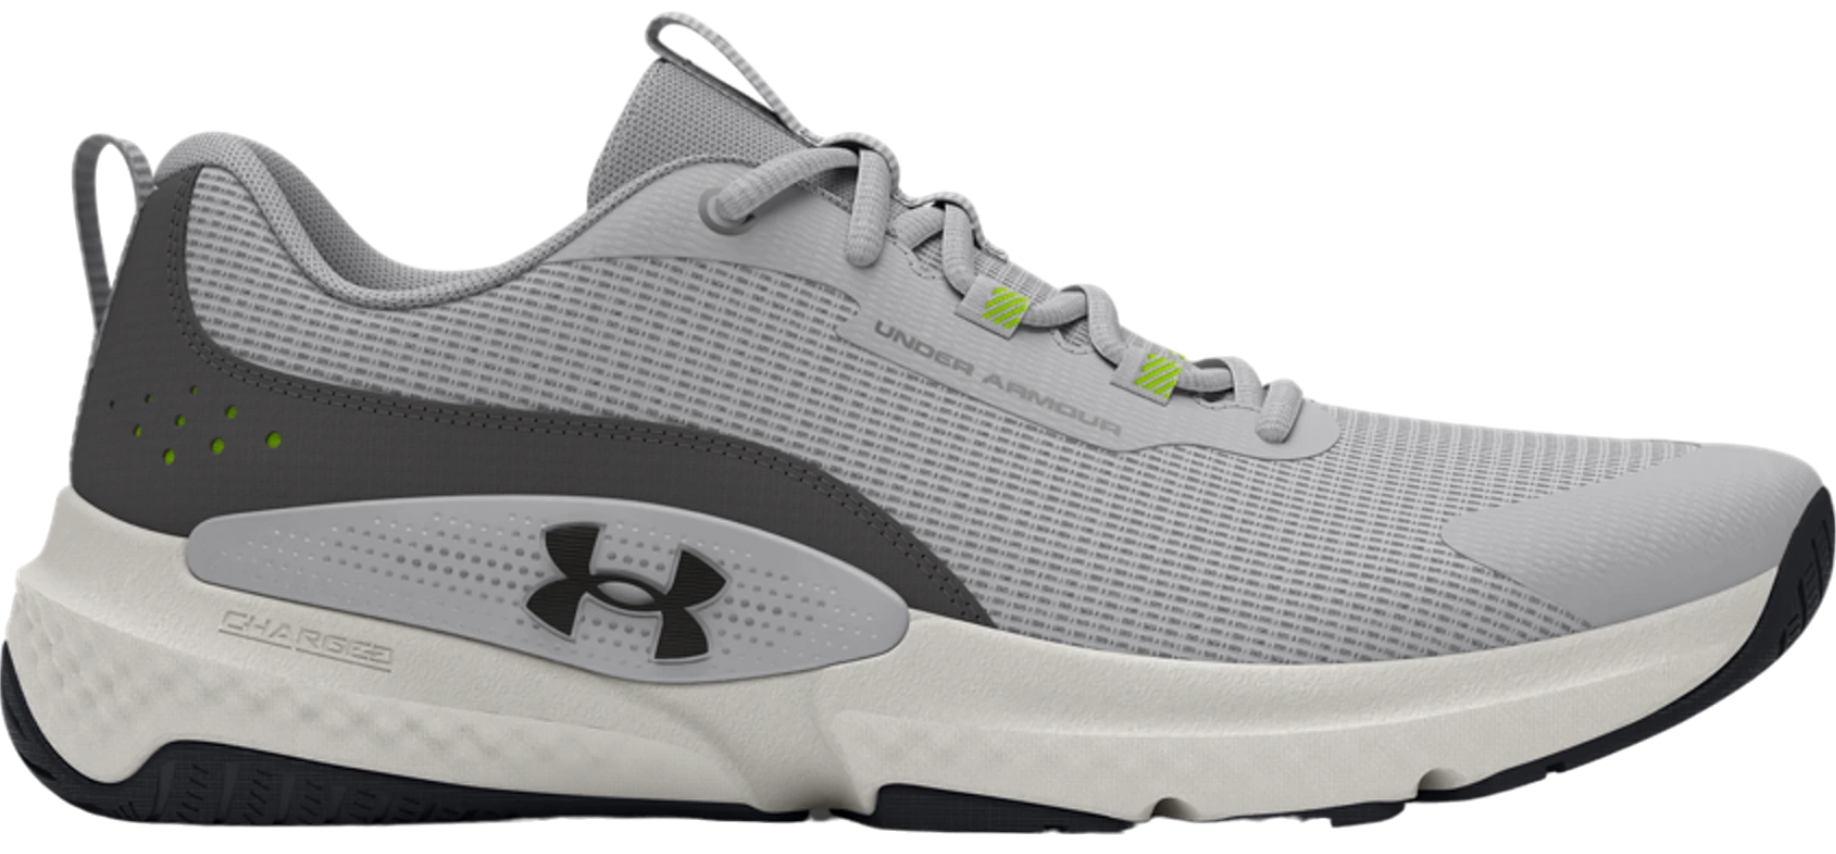 Fitness shoes Under Armour Dynamic Select